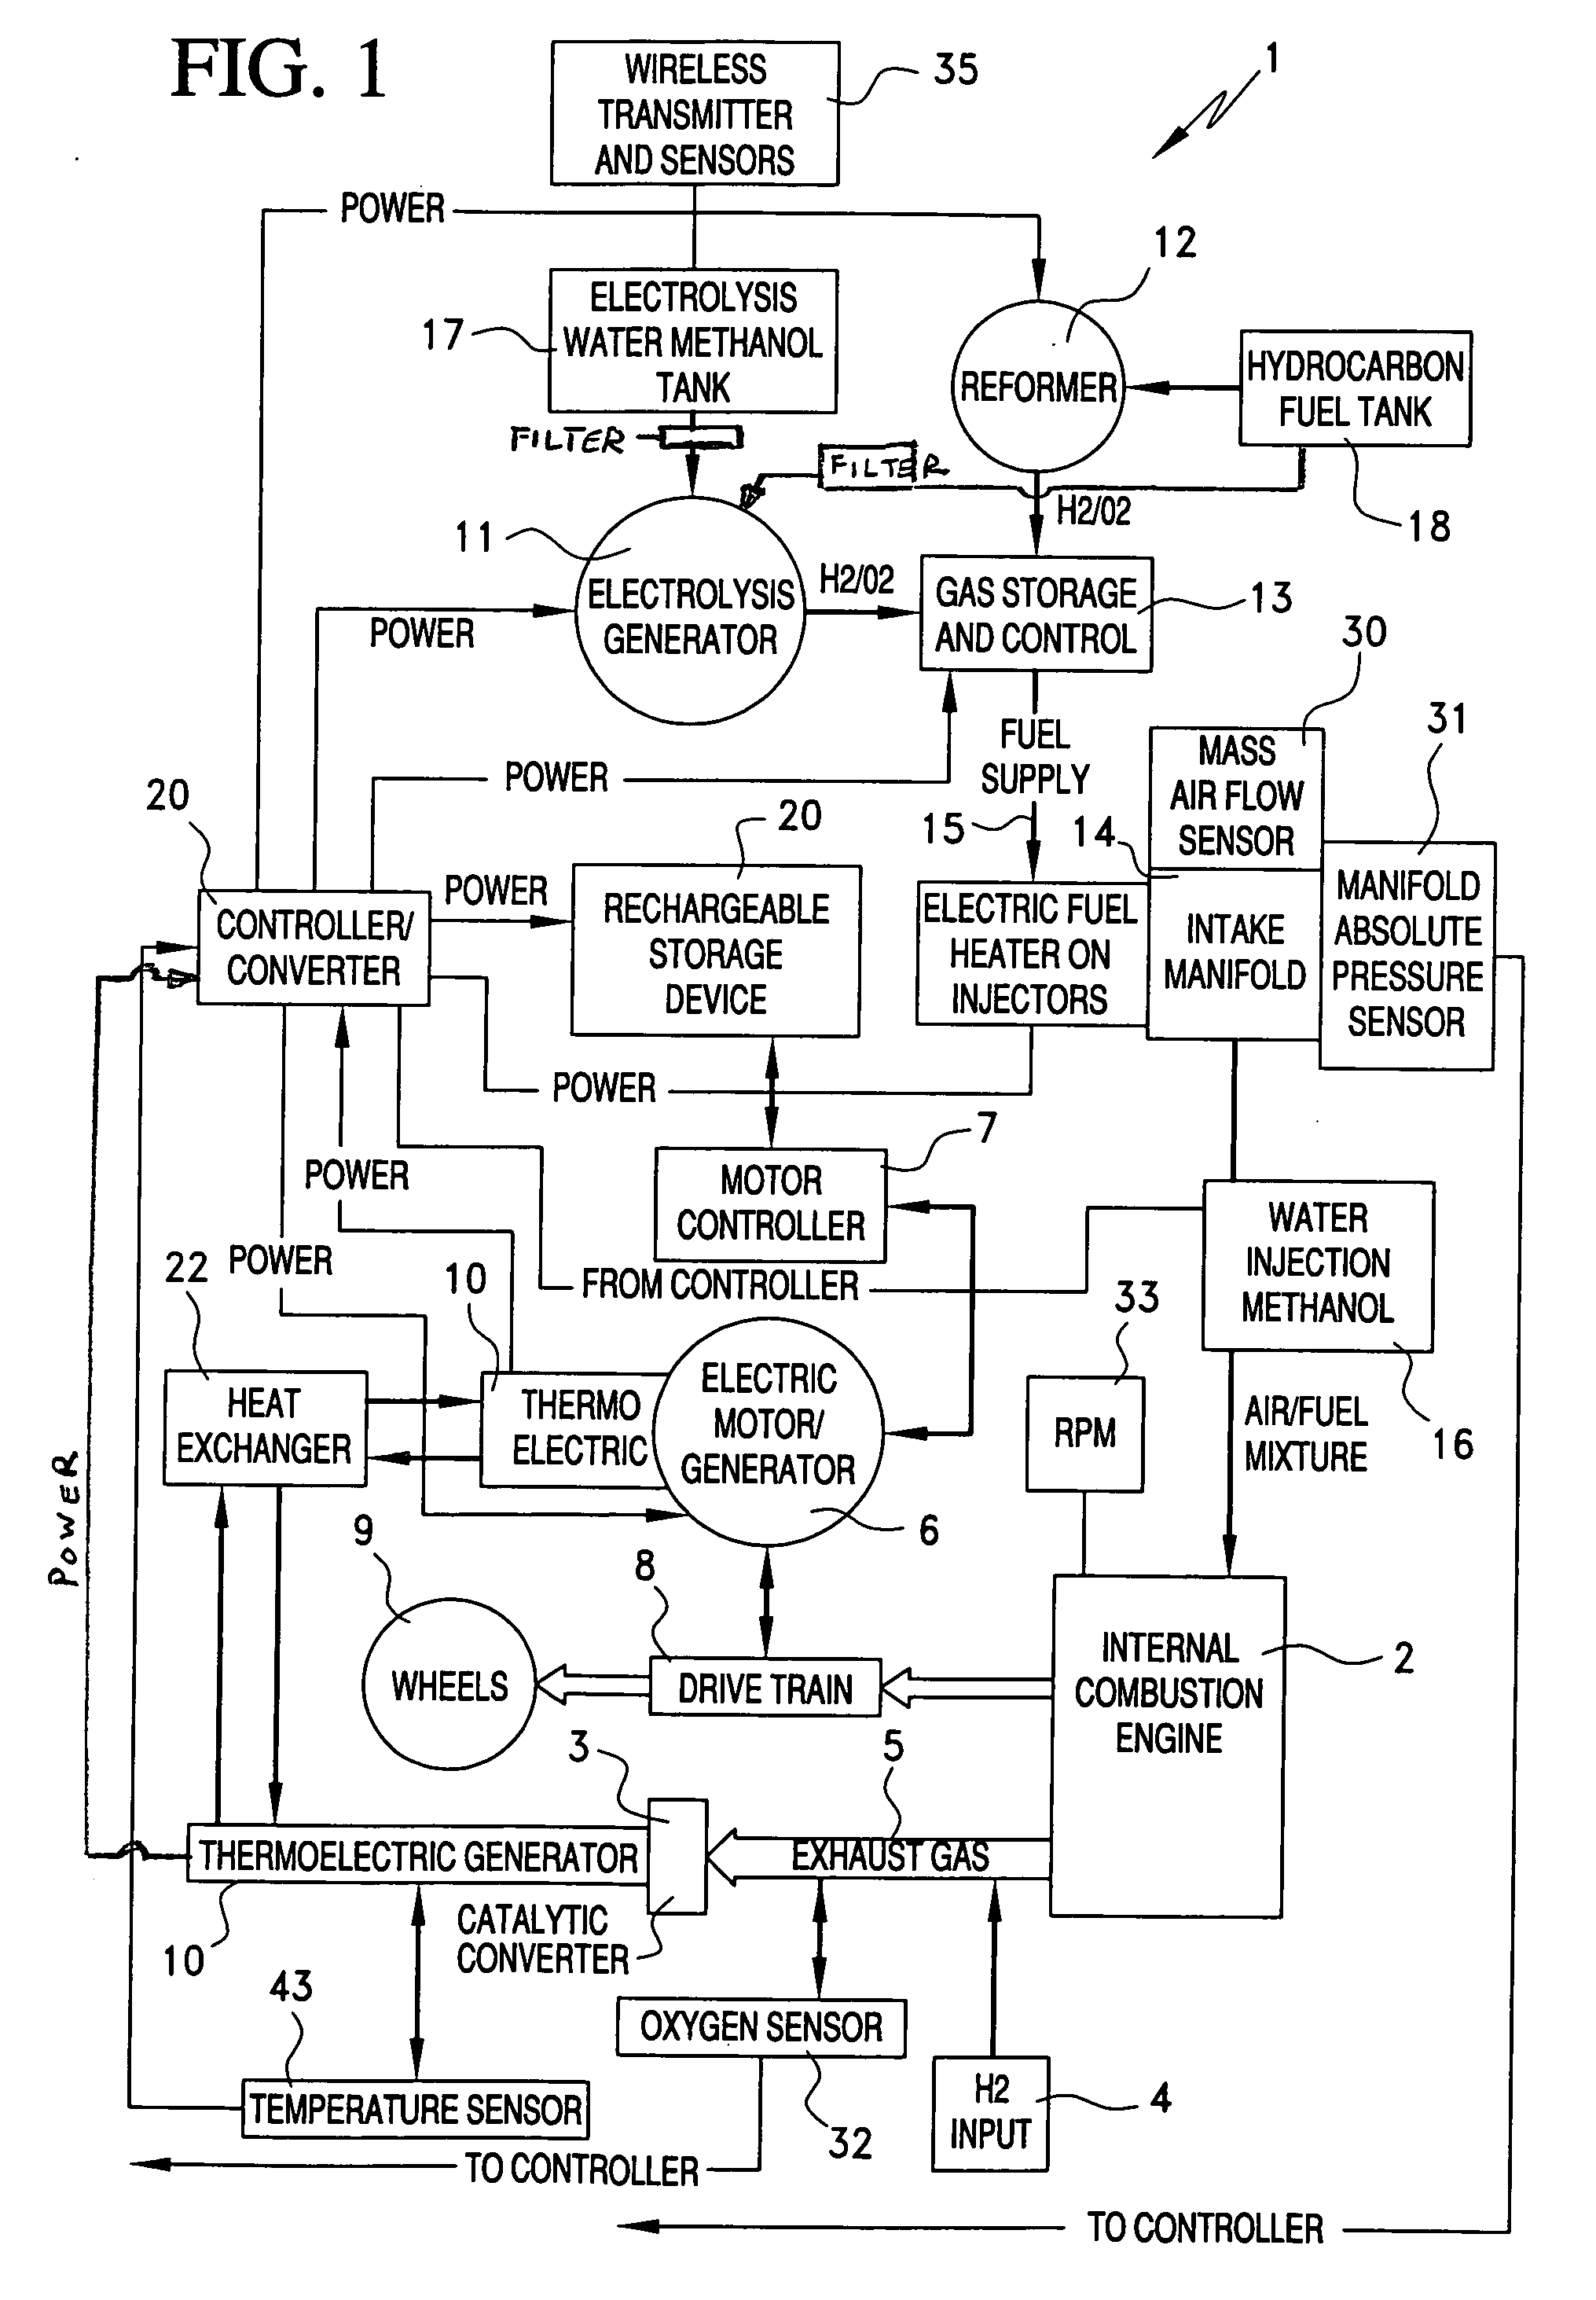 System and method for reducing vehicle emissions and/or generating hydrogen